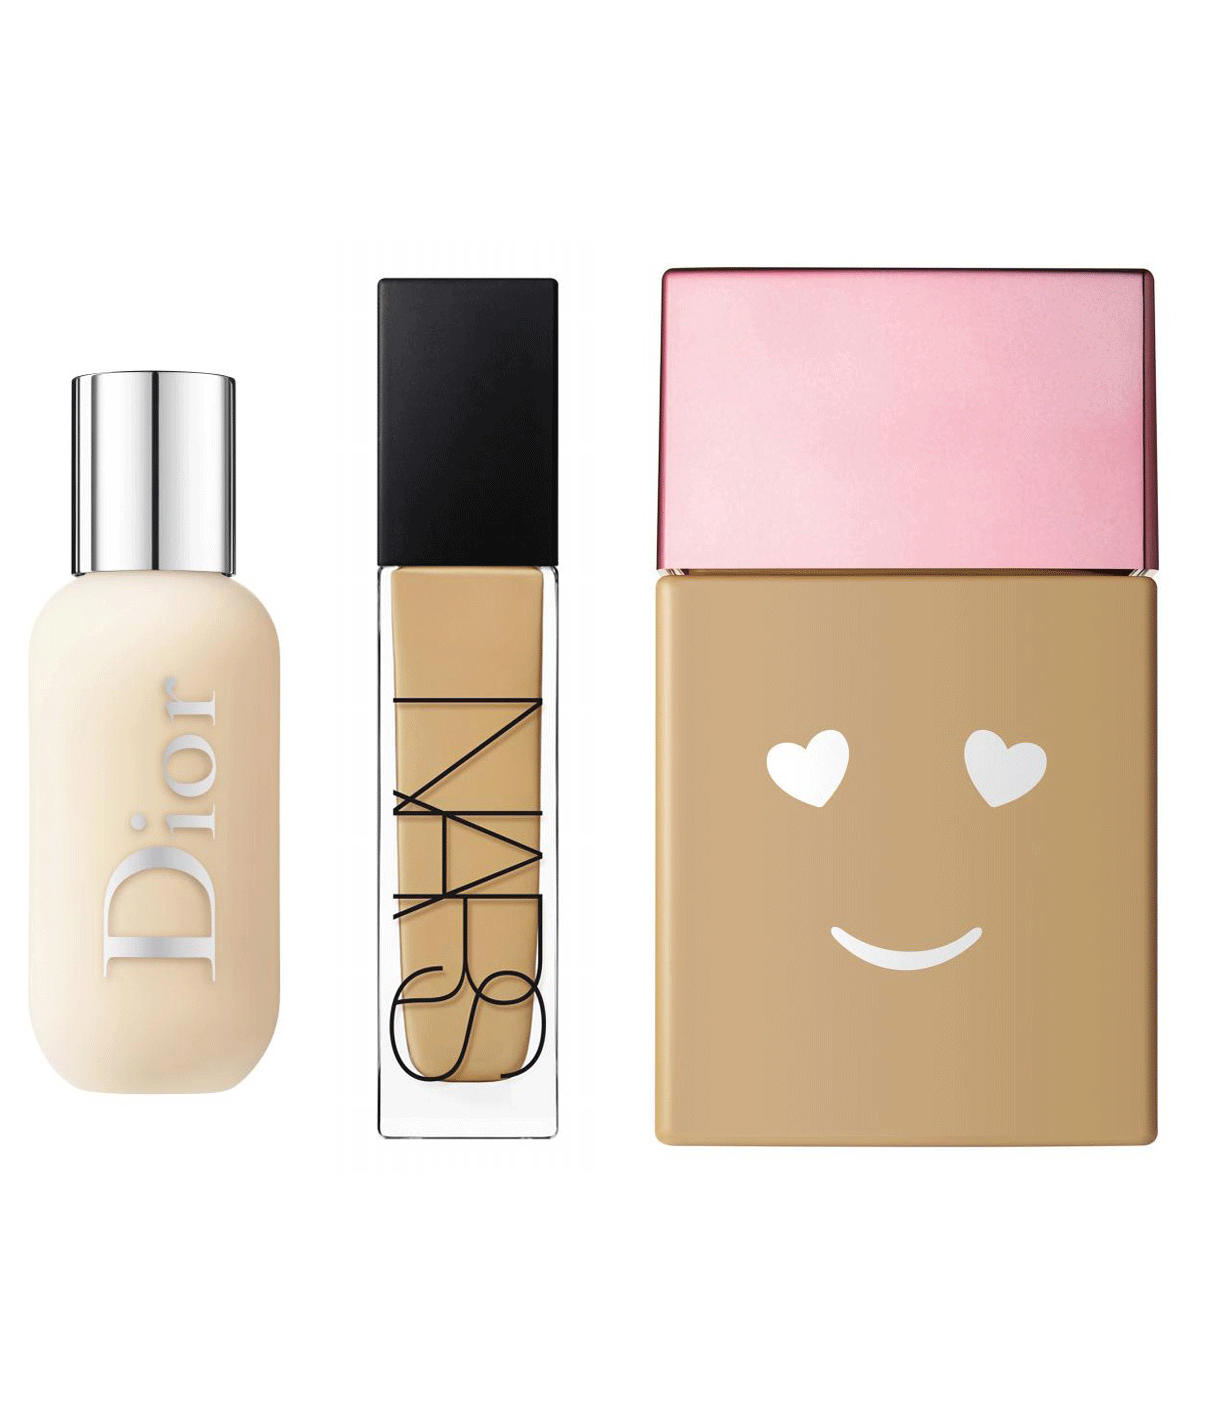 Maquillaje Dior face and body foundation, Nars natural radiant...